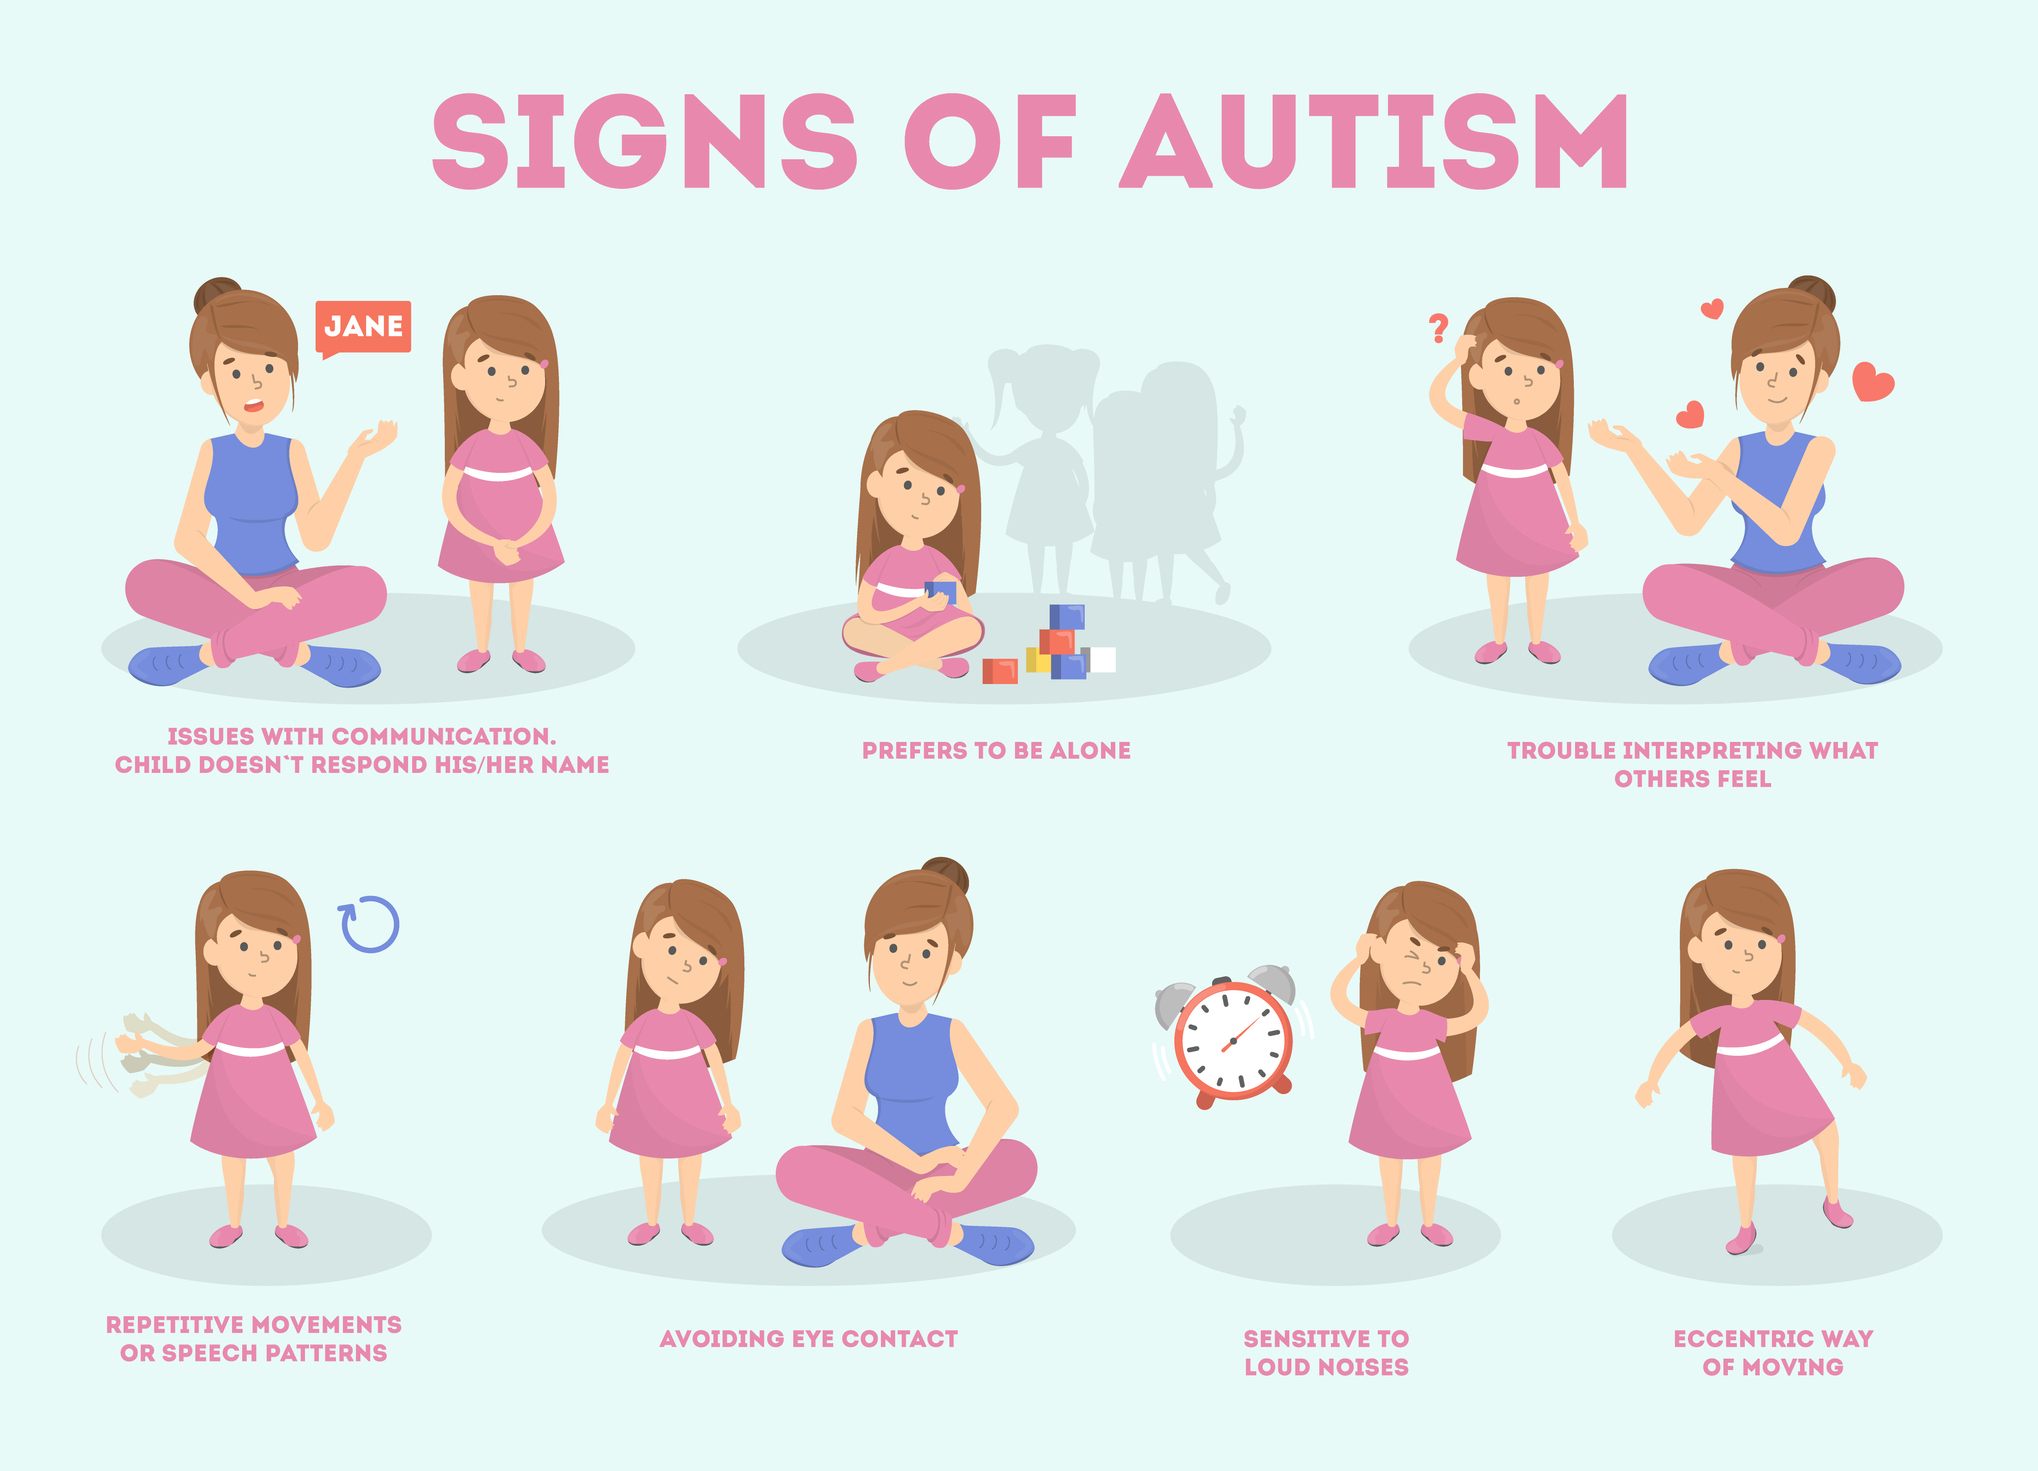 Symptoms of Autism and different levels